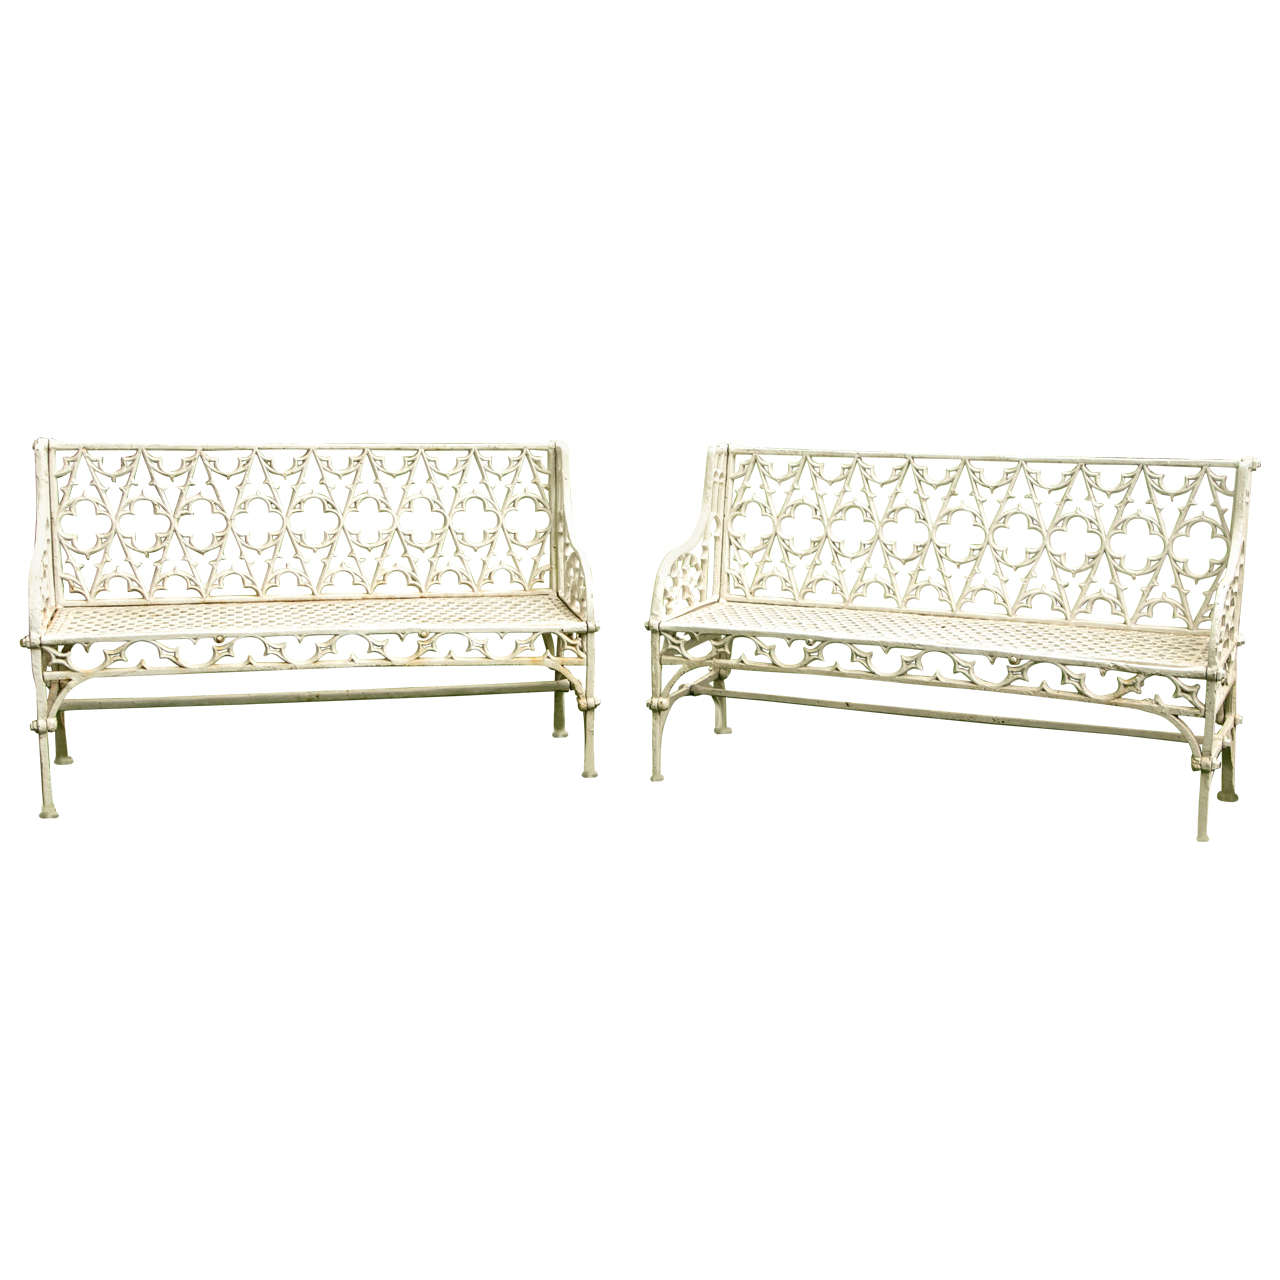 Pair of Gothic Style Cast Iron Garden Benches